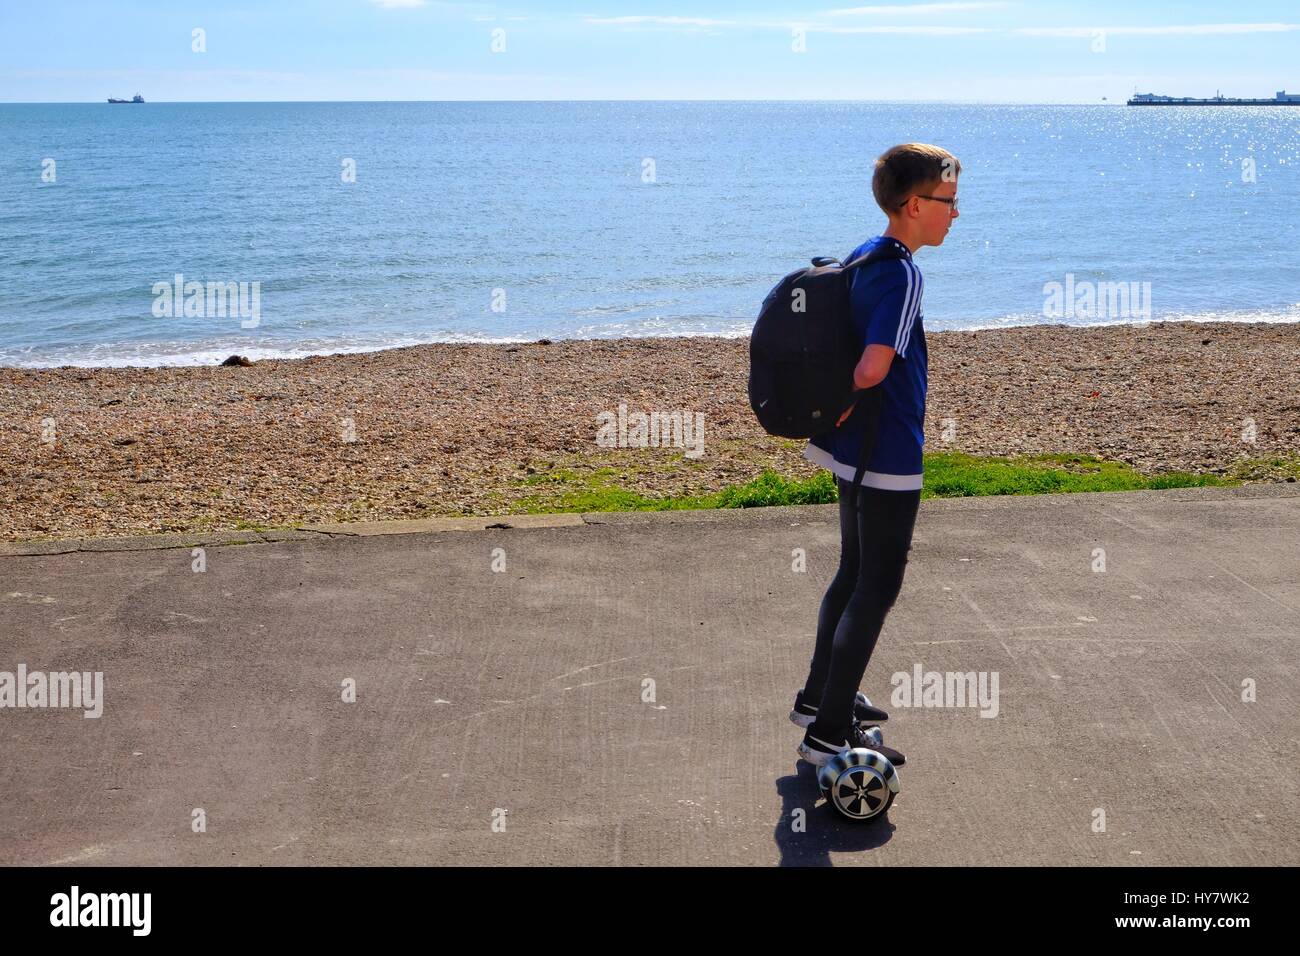 Weymouth, Dorset, UK. 2 April 2017.  A young person enjoys a modern way to prominade along the seafront in Weymouth as the temprature continues to stay above the seasonal average. Credit: Tom Corban/Alamy Live News Stock Photo